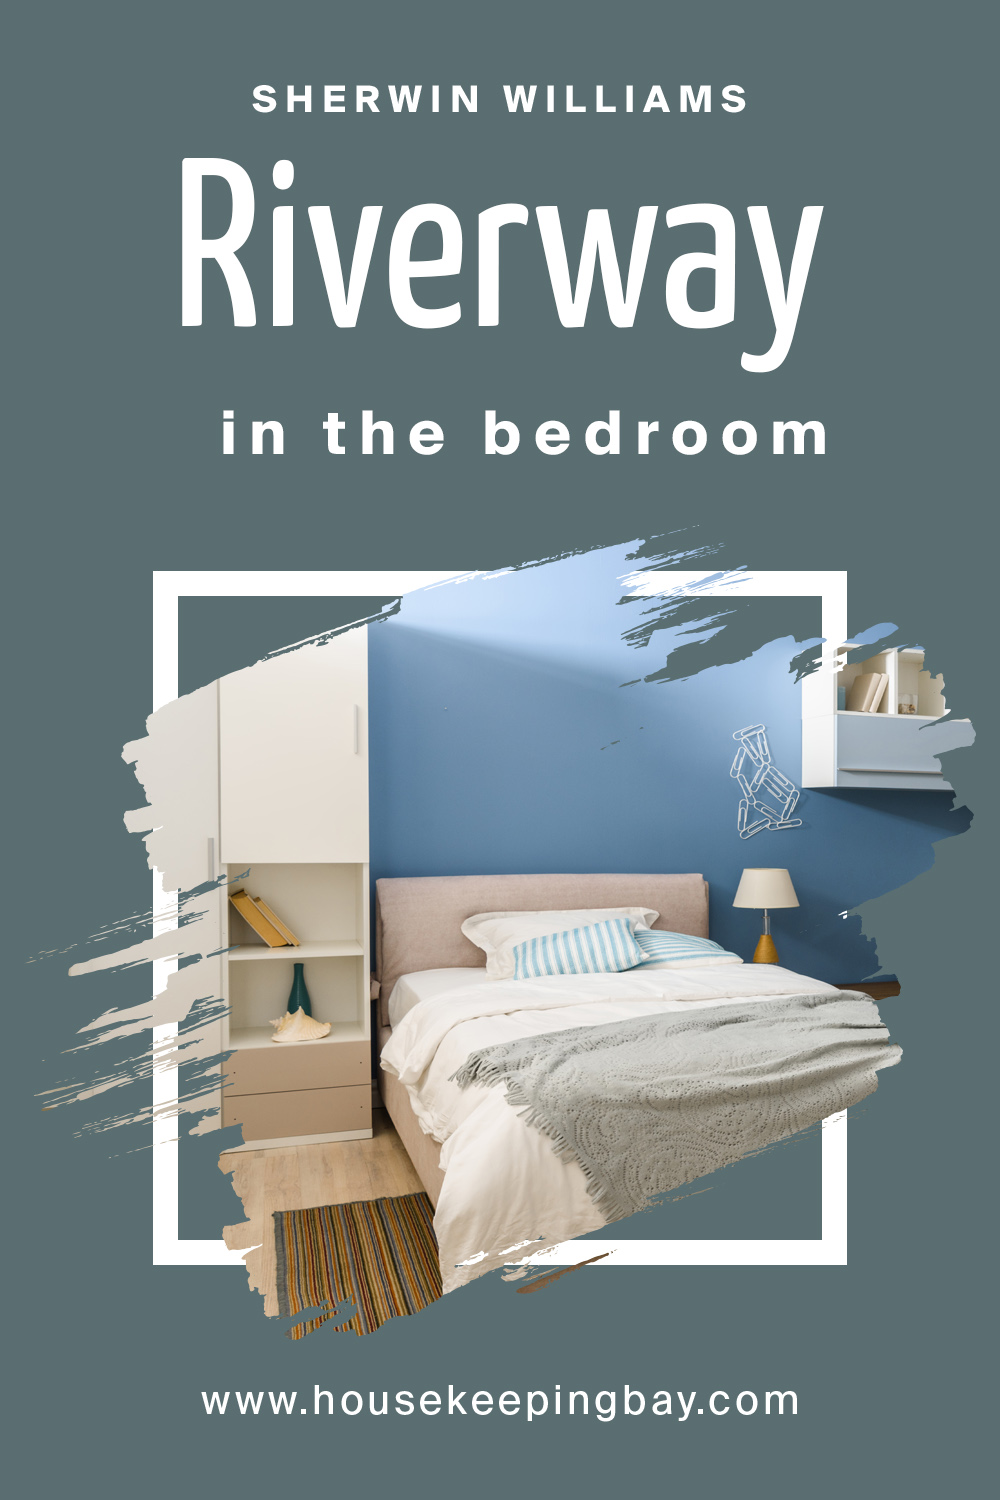 riverway by sherwin williams in the bedroom